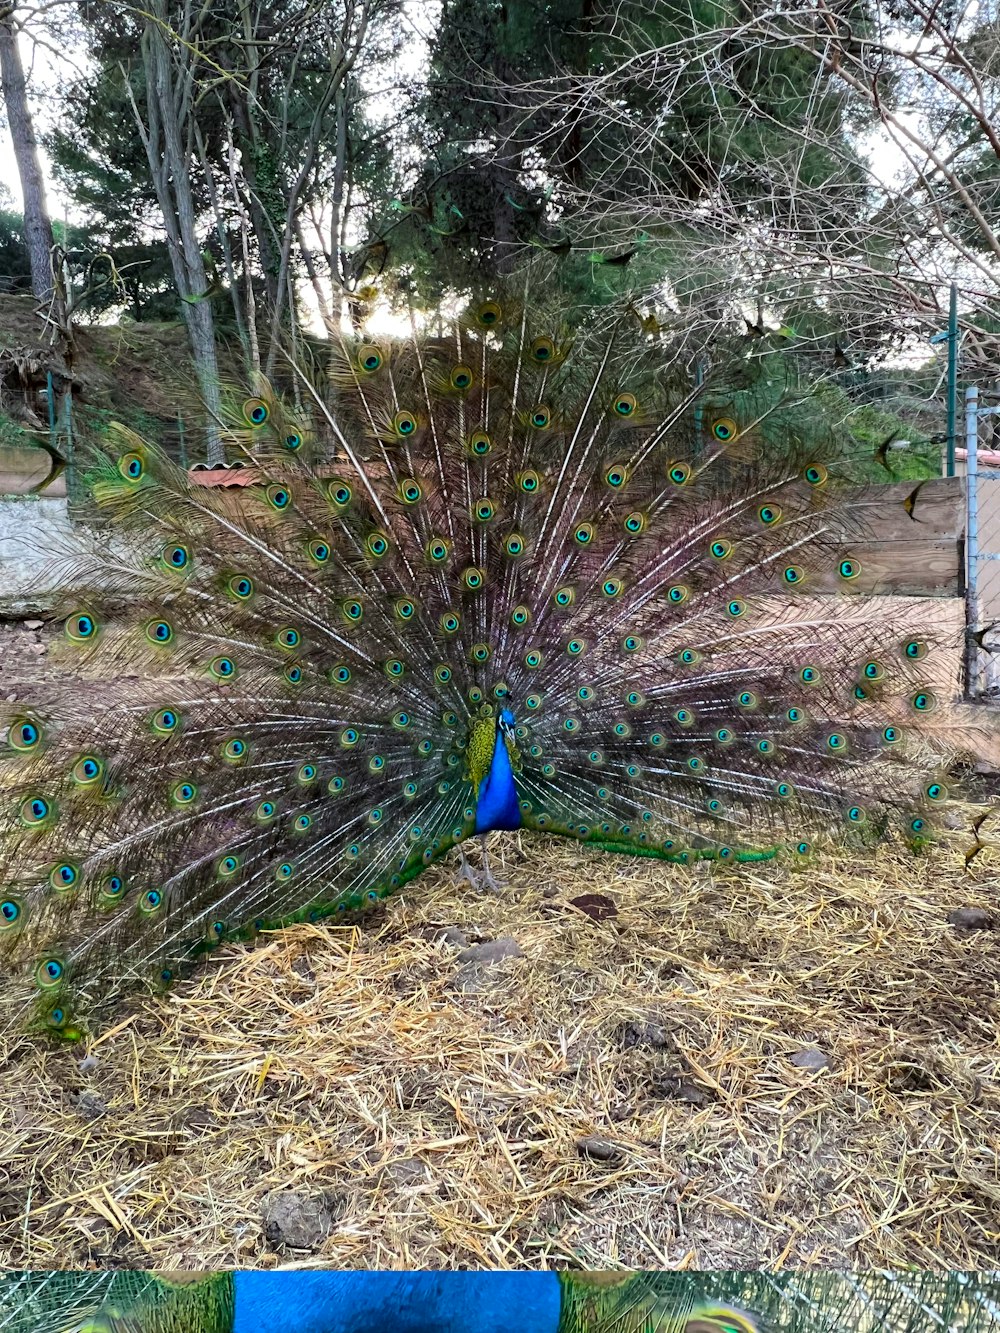 a peacock with its feathers spread out in a field